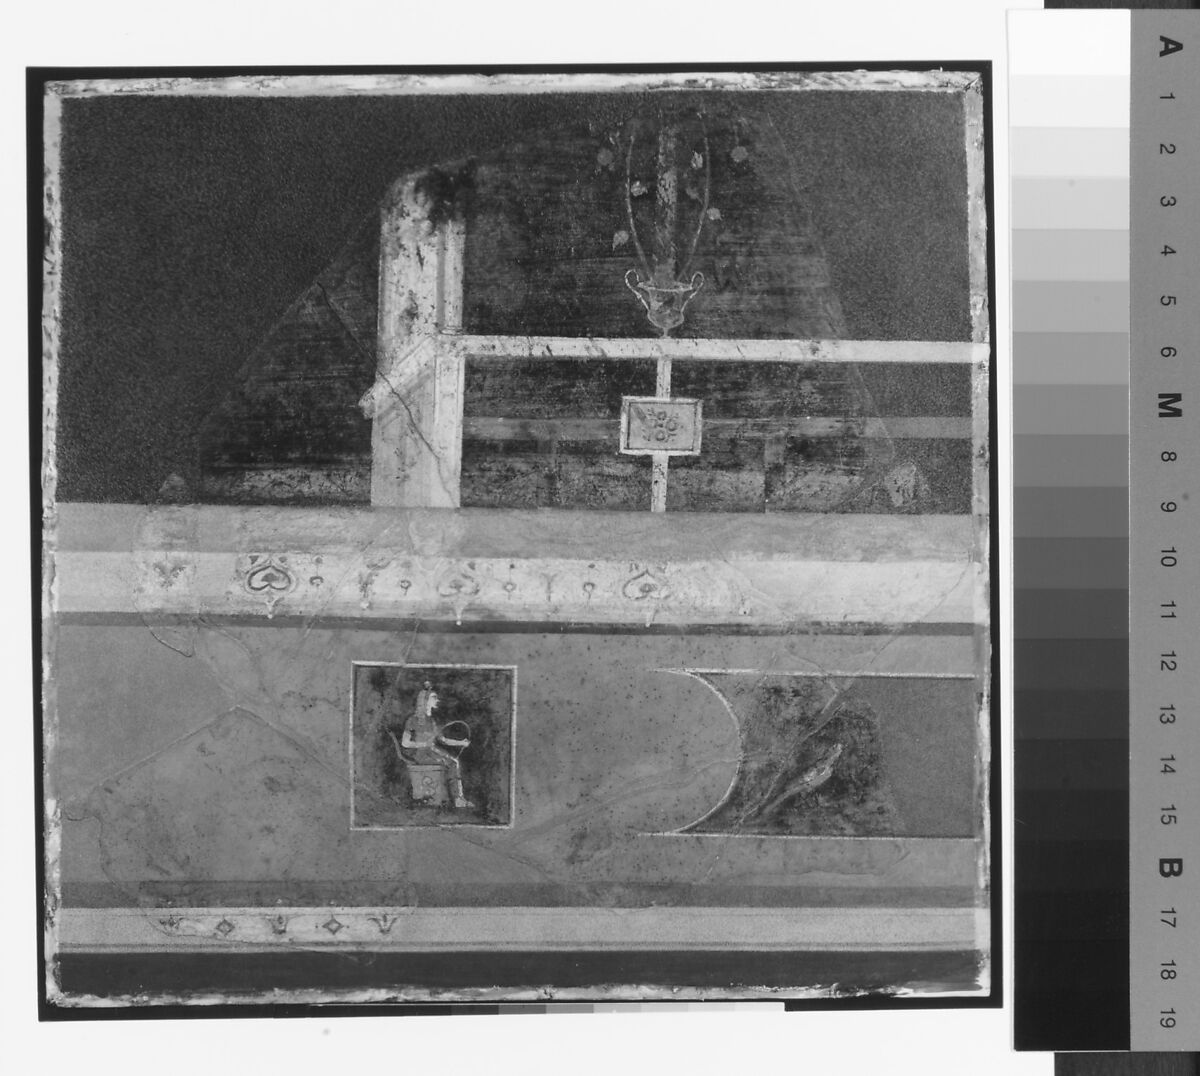 Wall painting: frieze supporting trellis, from the imperial villa at Boscotrecase, Fresco, Roman, Pompeian 